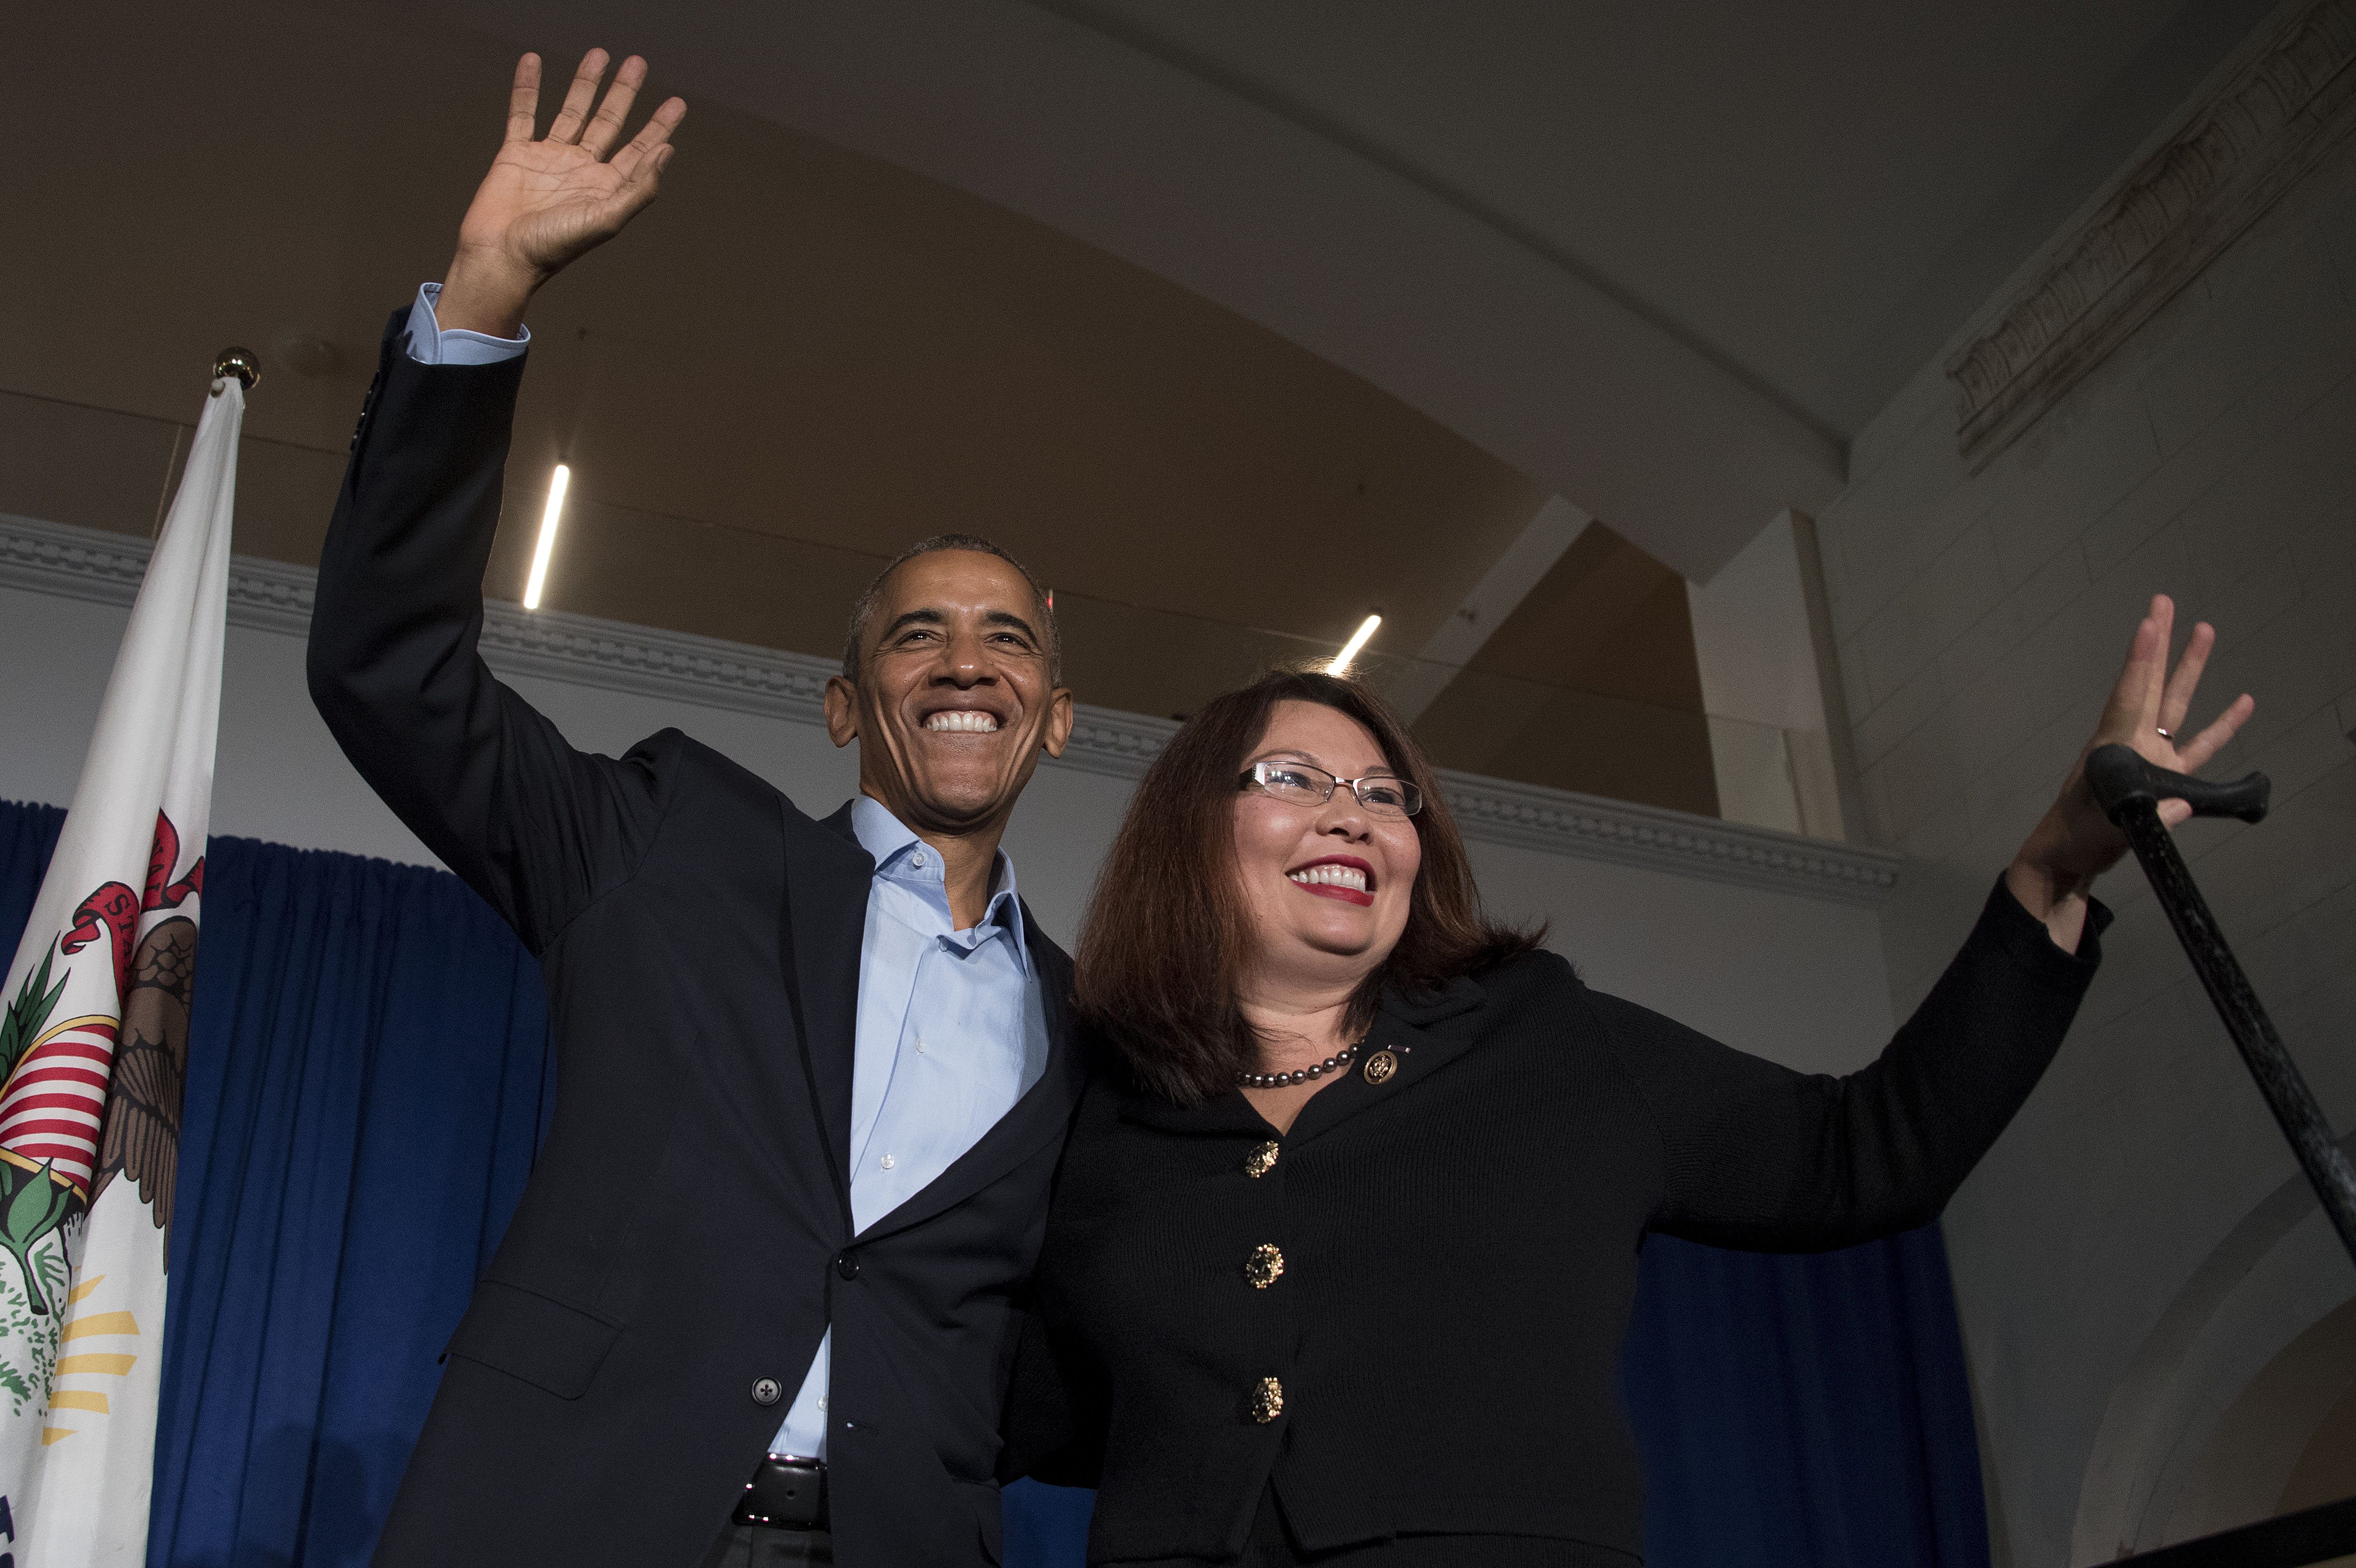 US President Barack Obama waves to the crowd with Congresswoman Tammy Duckworth, D-IL, (R) during a Coordinated Victory Fund Event in Chicago, Illinois, October 9, 2016. / AFP PHOTO / JIM WATSON